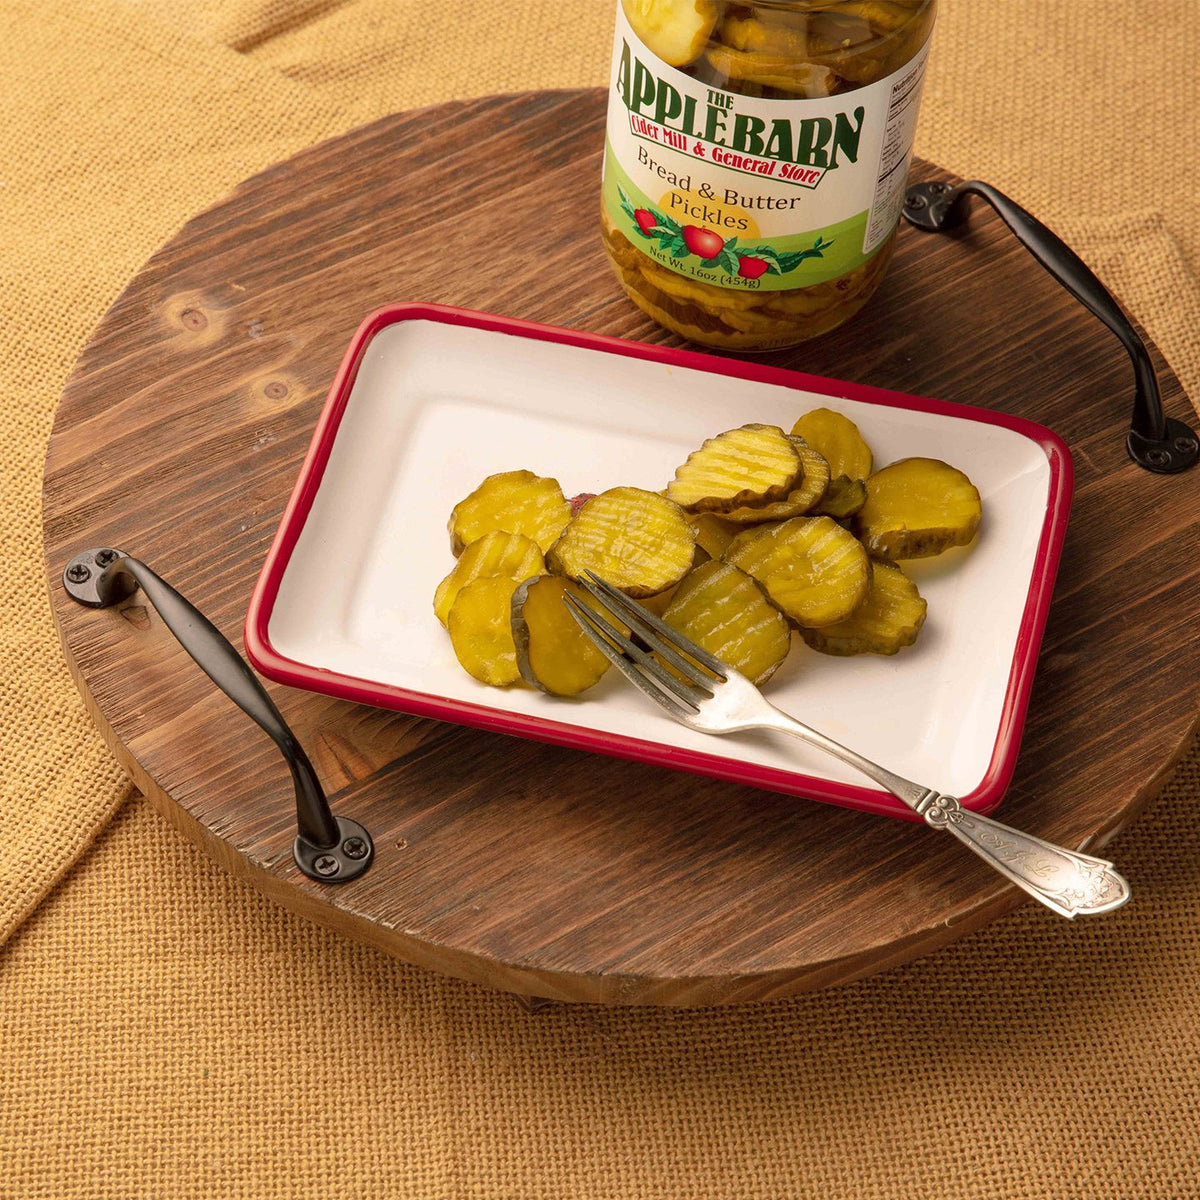 Pickles on plate